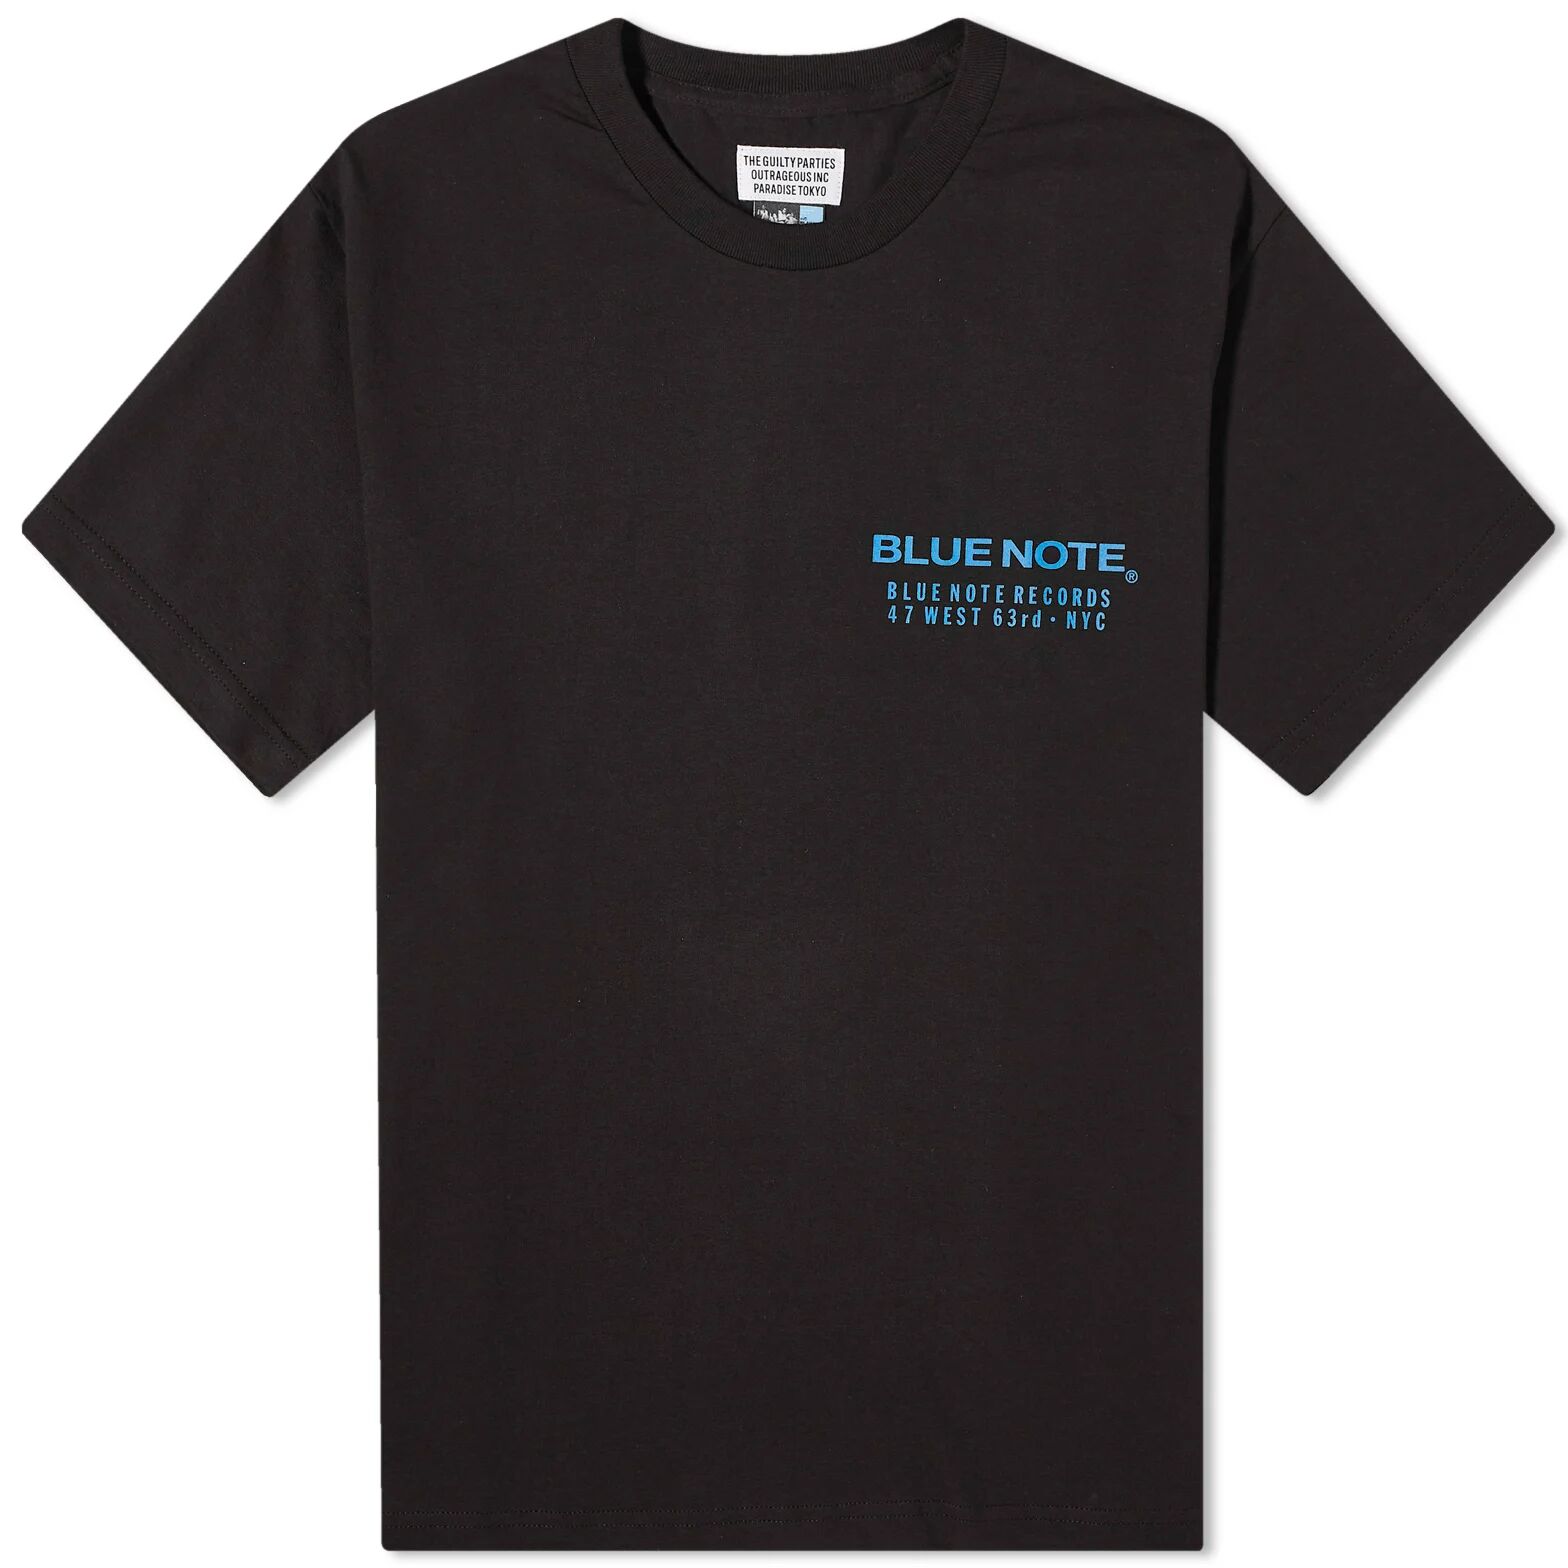 Wacko Maria Men's Blue Note Type 1 T-Shirt in Black, Size Small